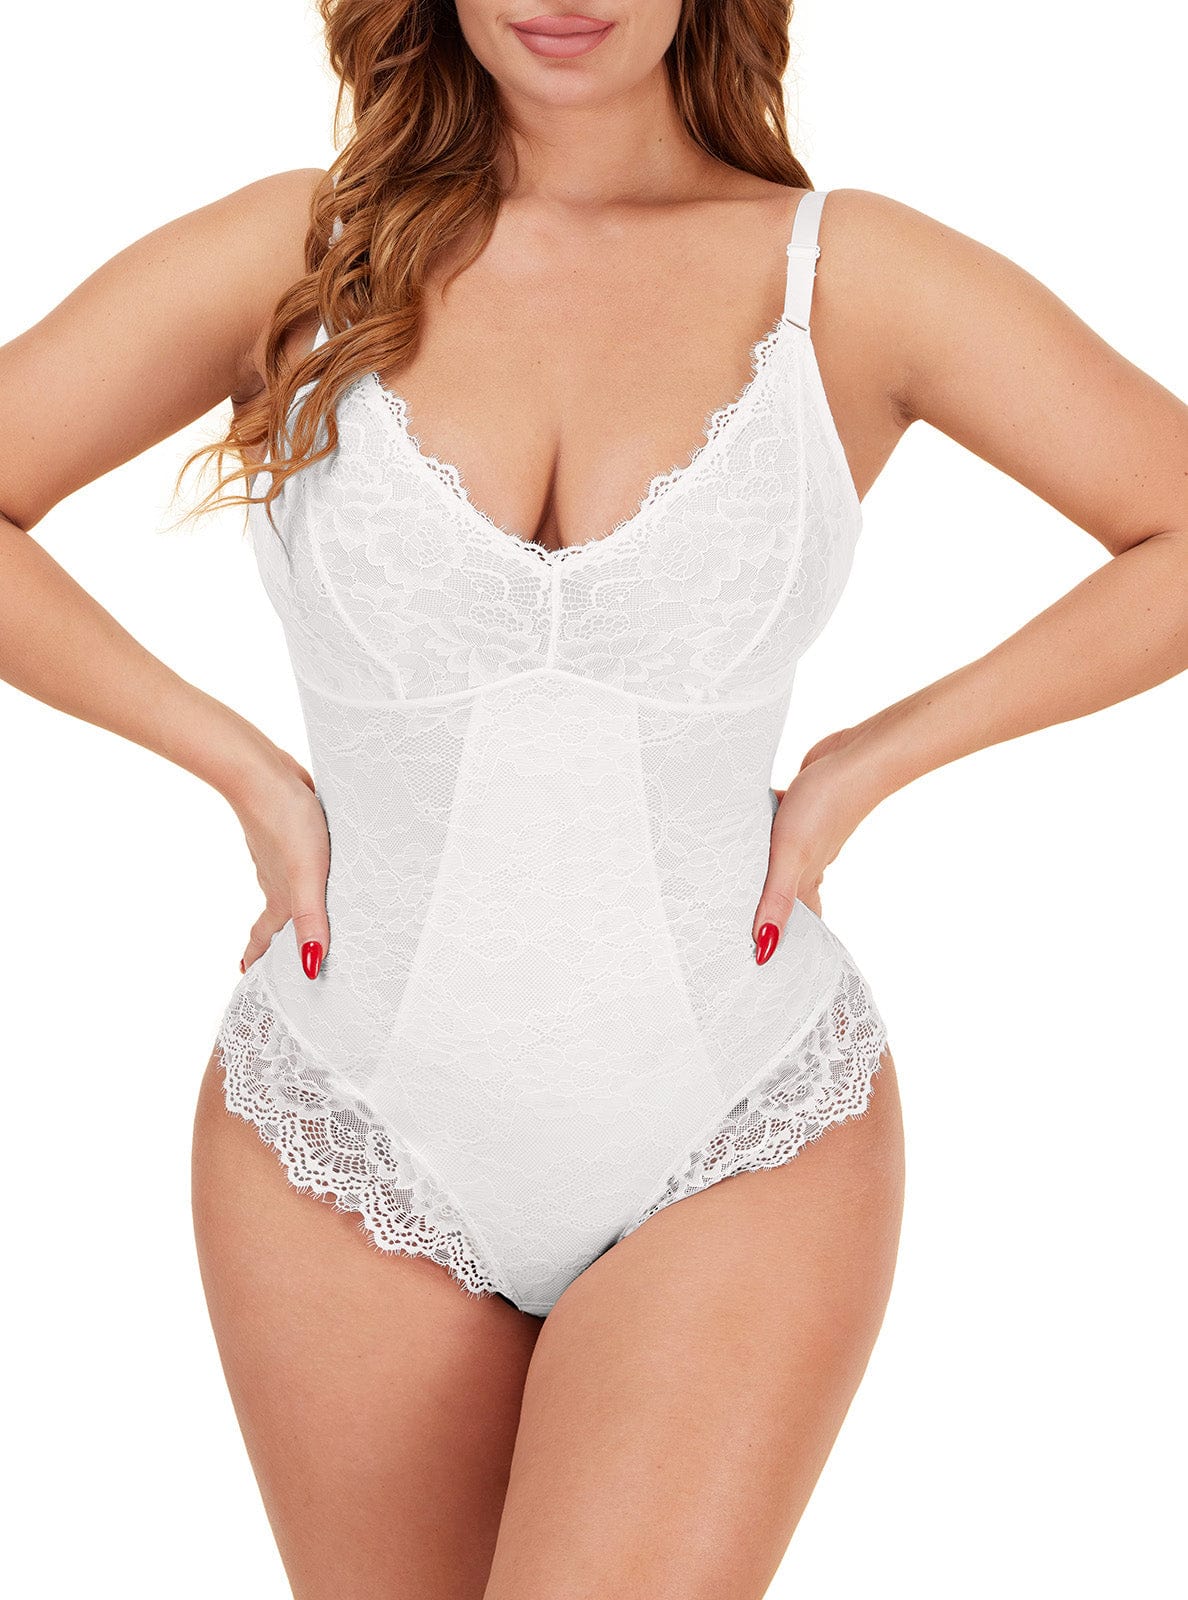 Wholesale Sexy Lace Breast Support Adjustable Shaper for Bridal Bodysu